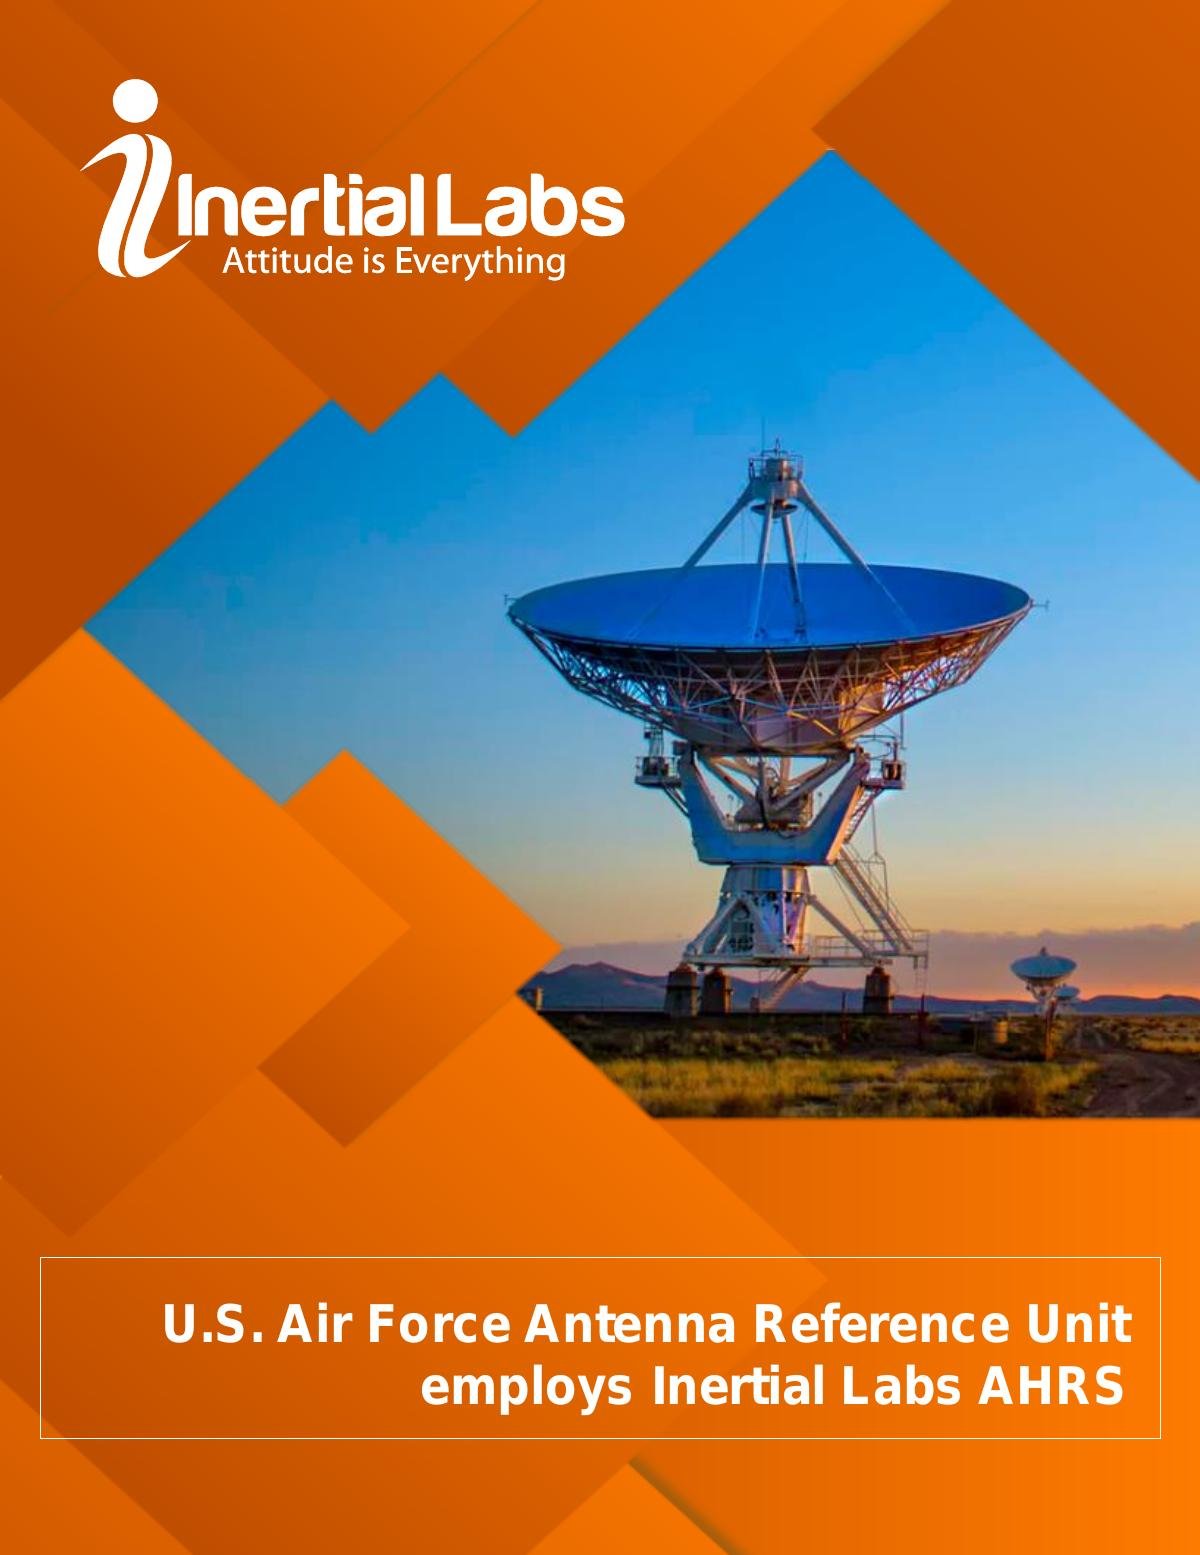 U.S. Air Force Antenna Reference Unit employs Inertial Labs AHRS